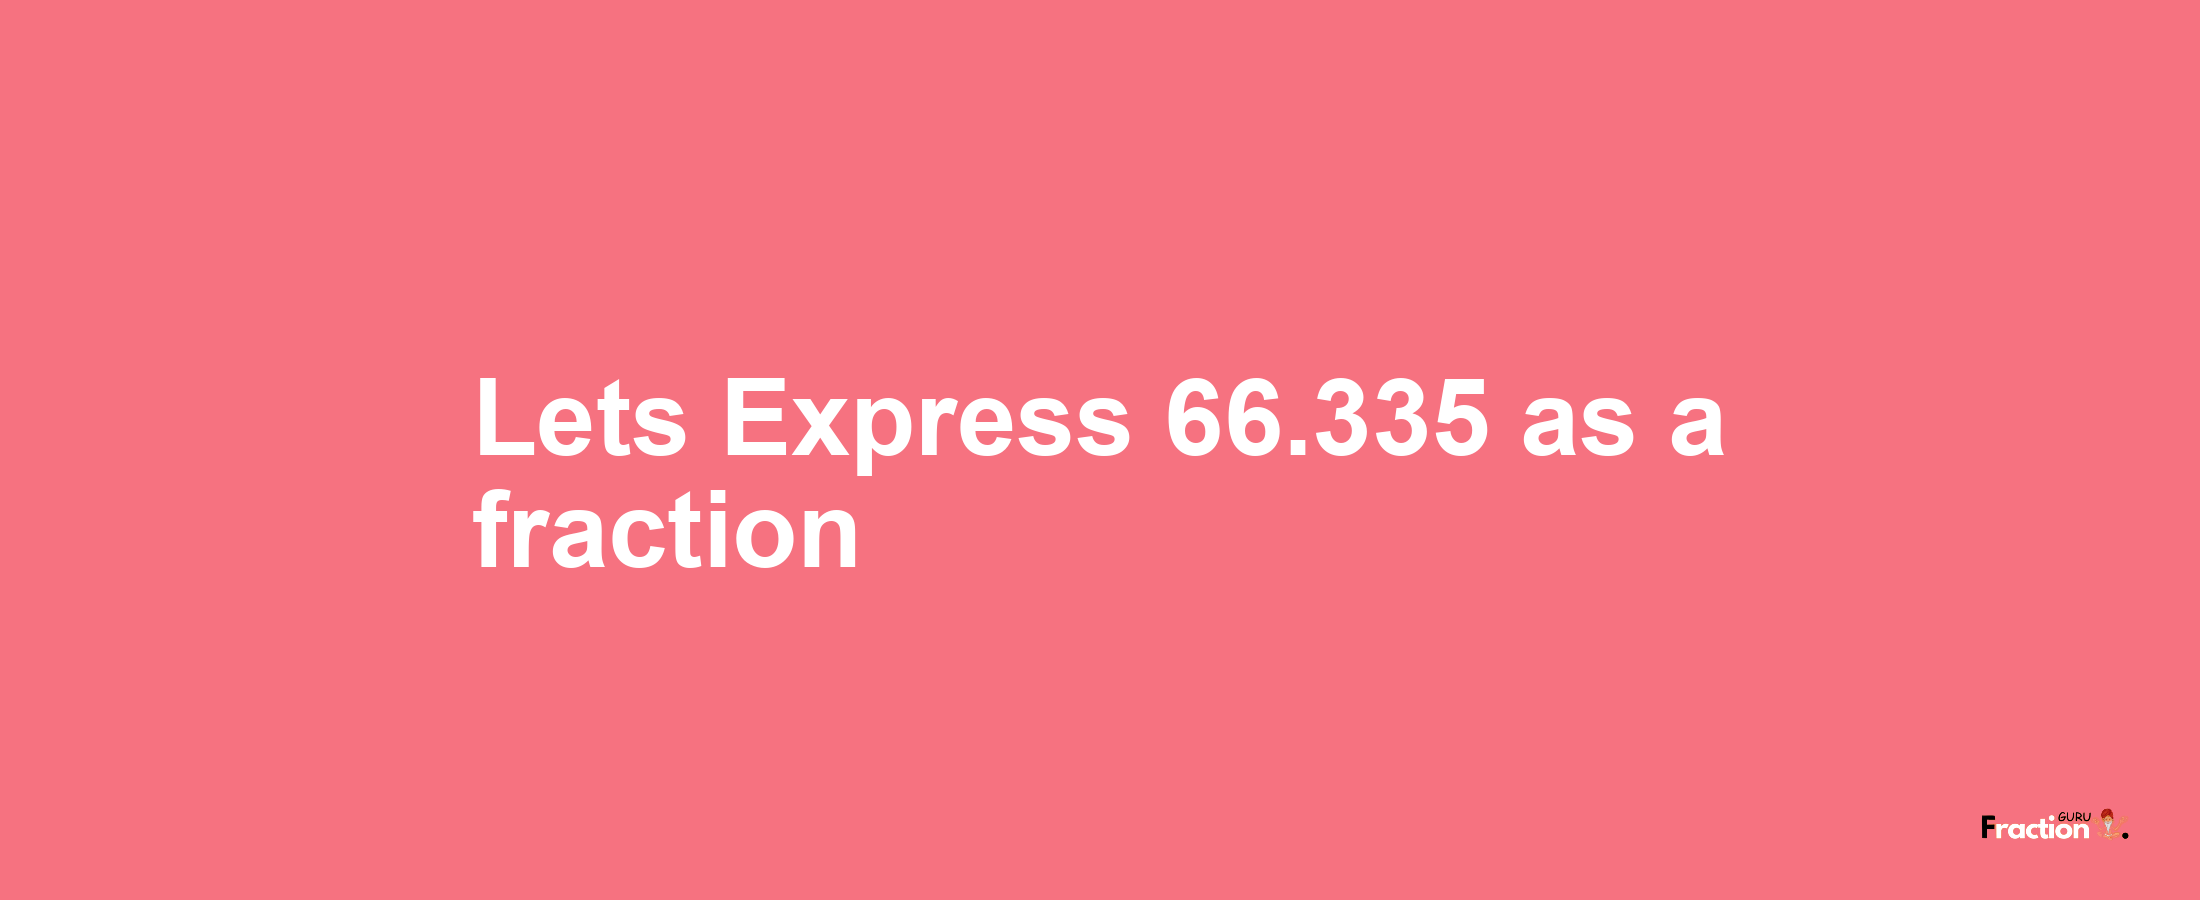 Lets Express 66.335 as afraction